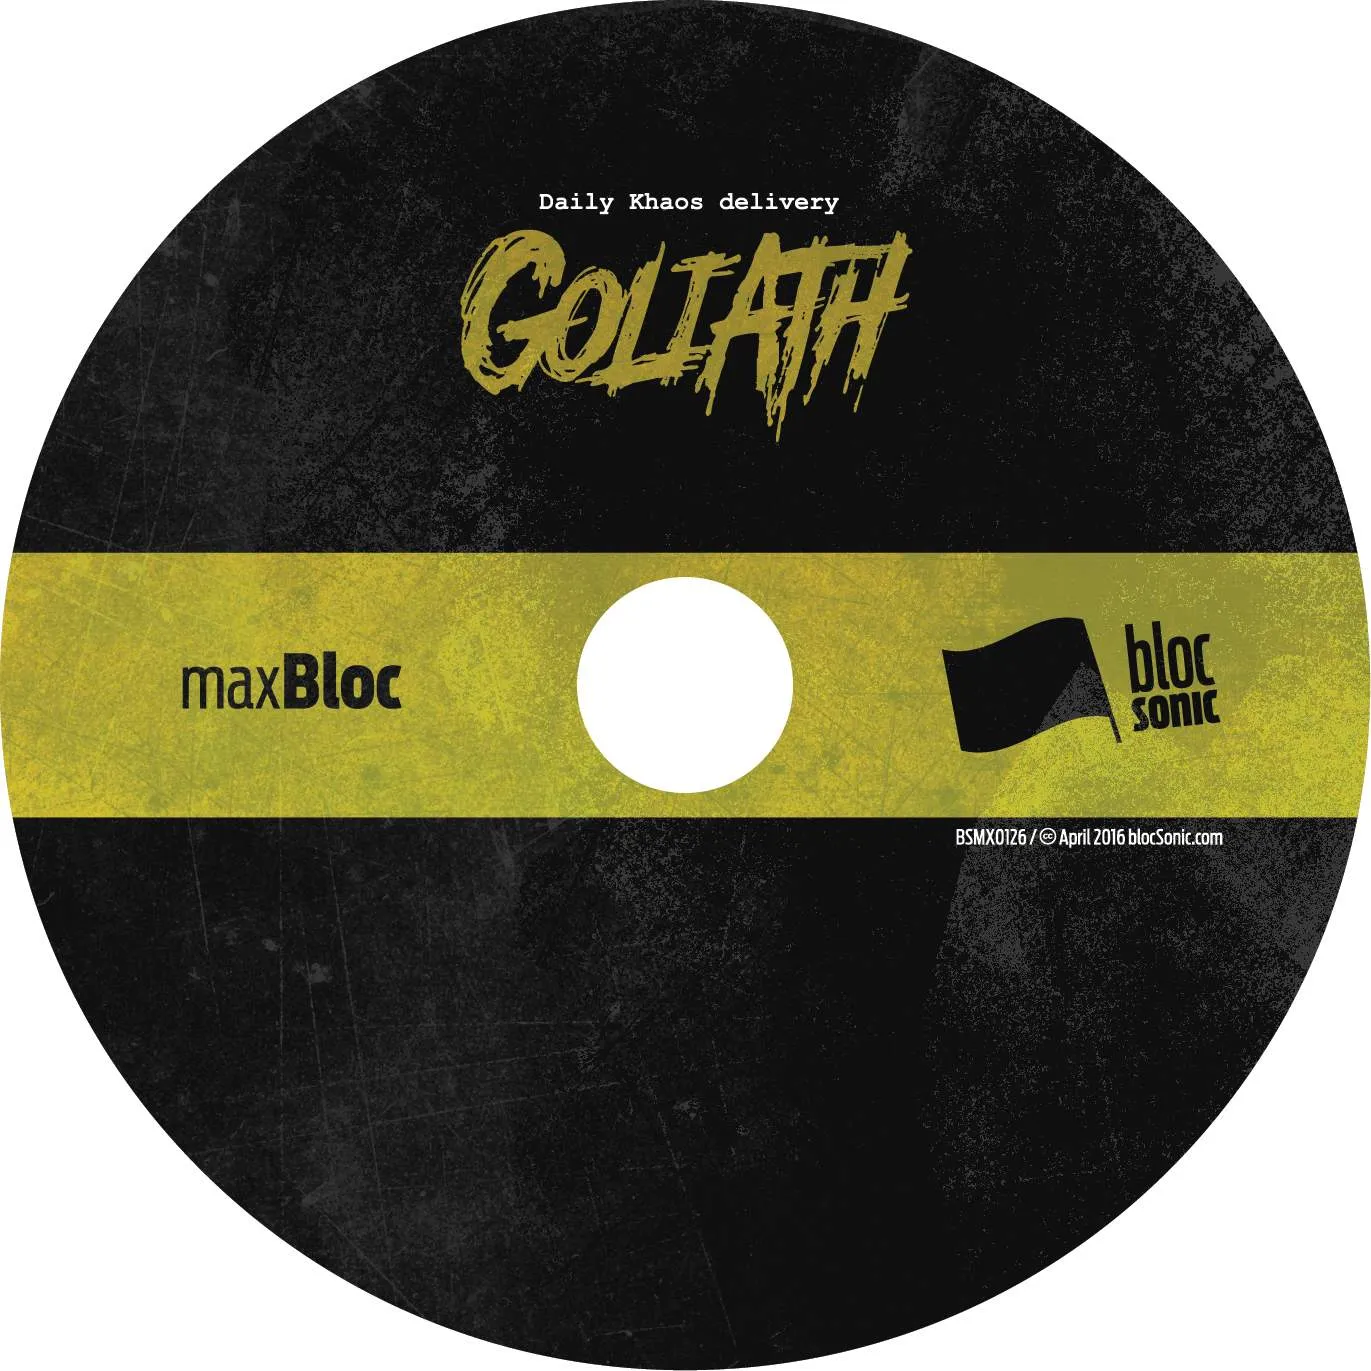 Album disc for “Goliath” by Daily Khaos delivery